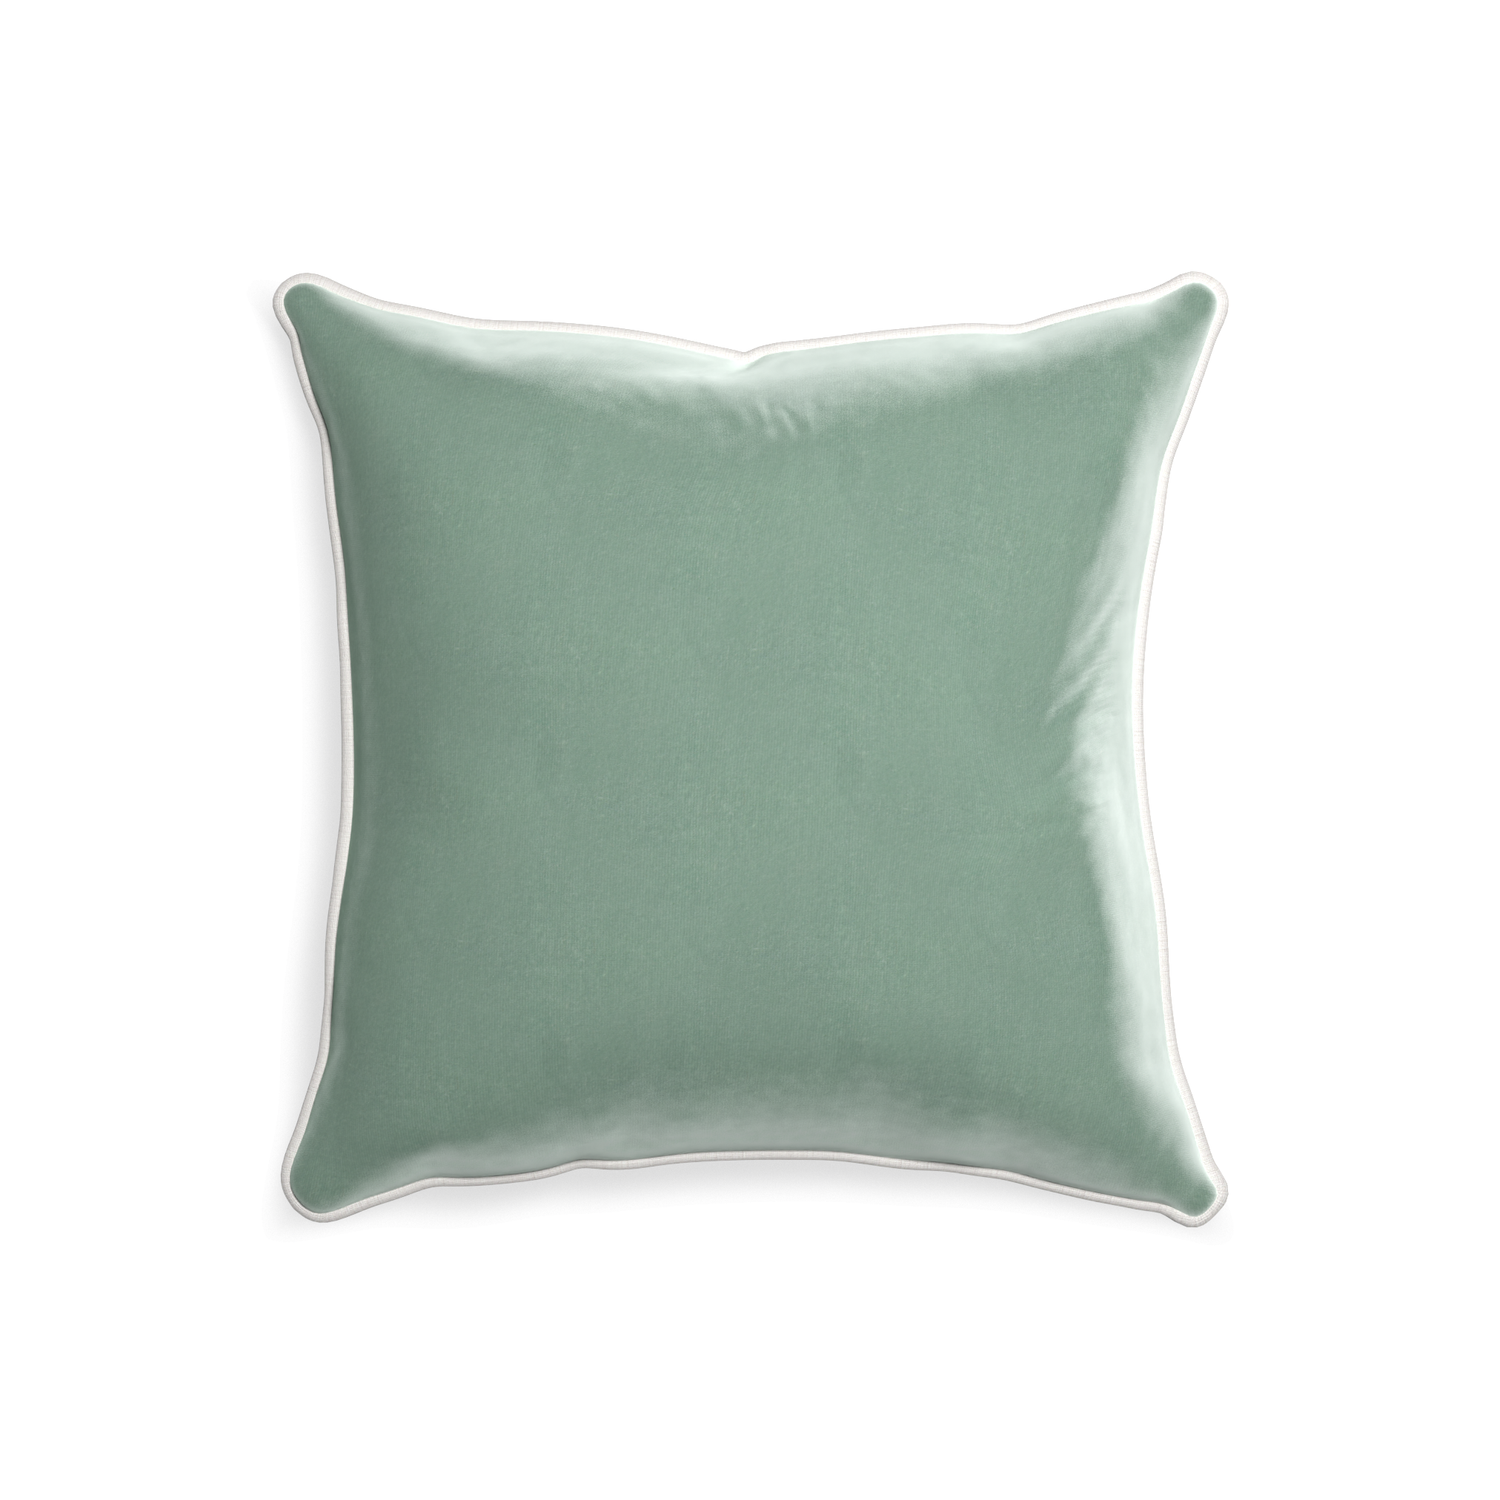 square blue green velvet pillow with white piping